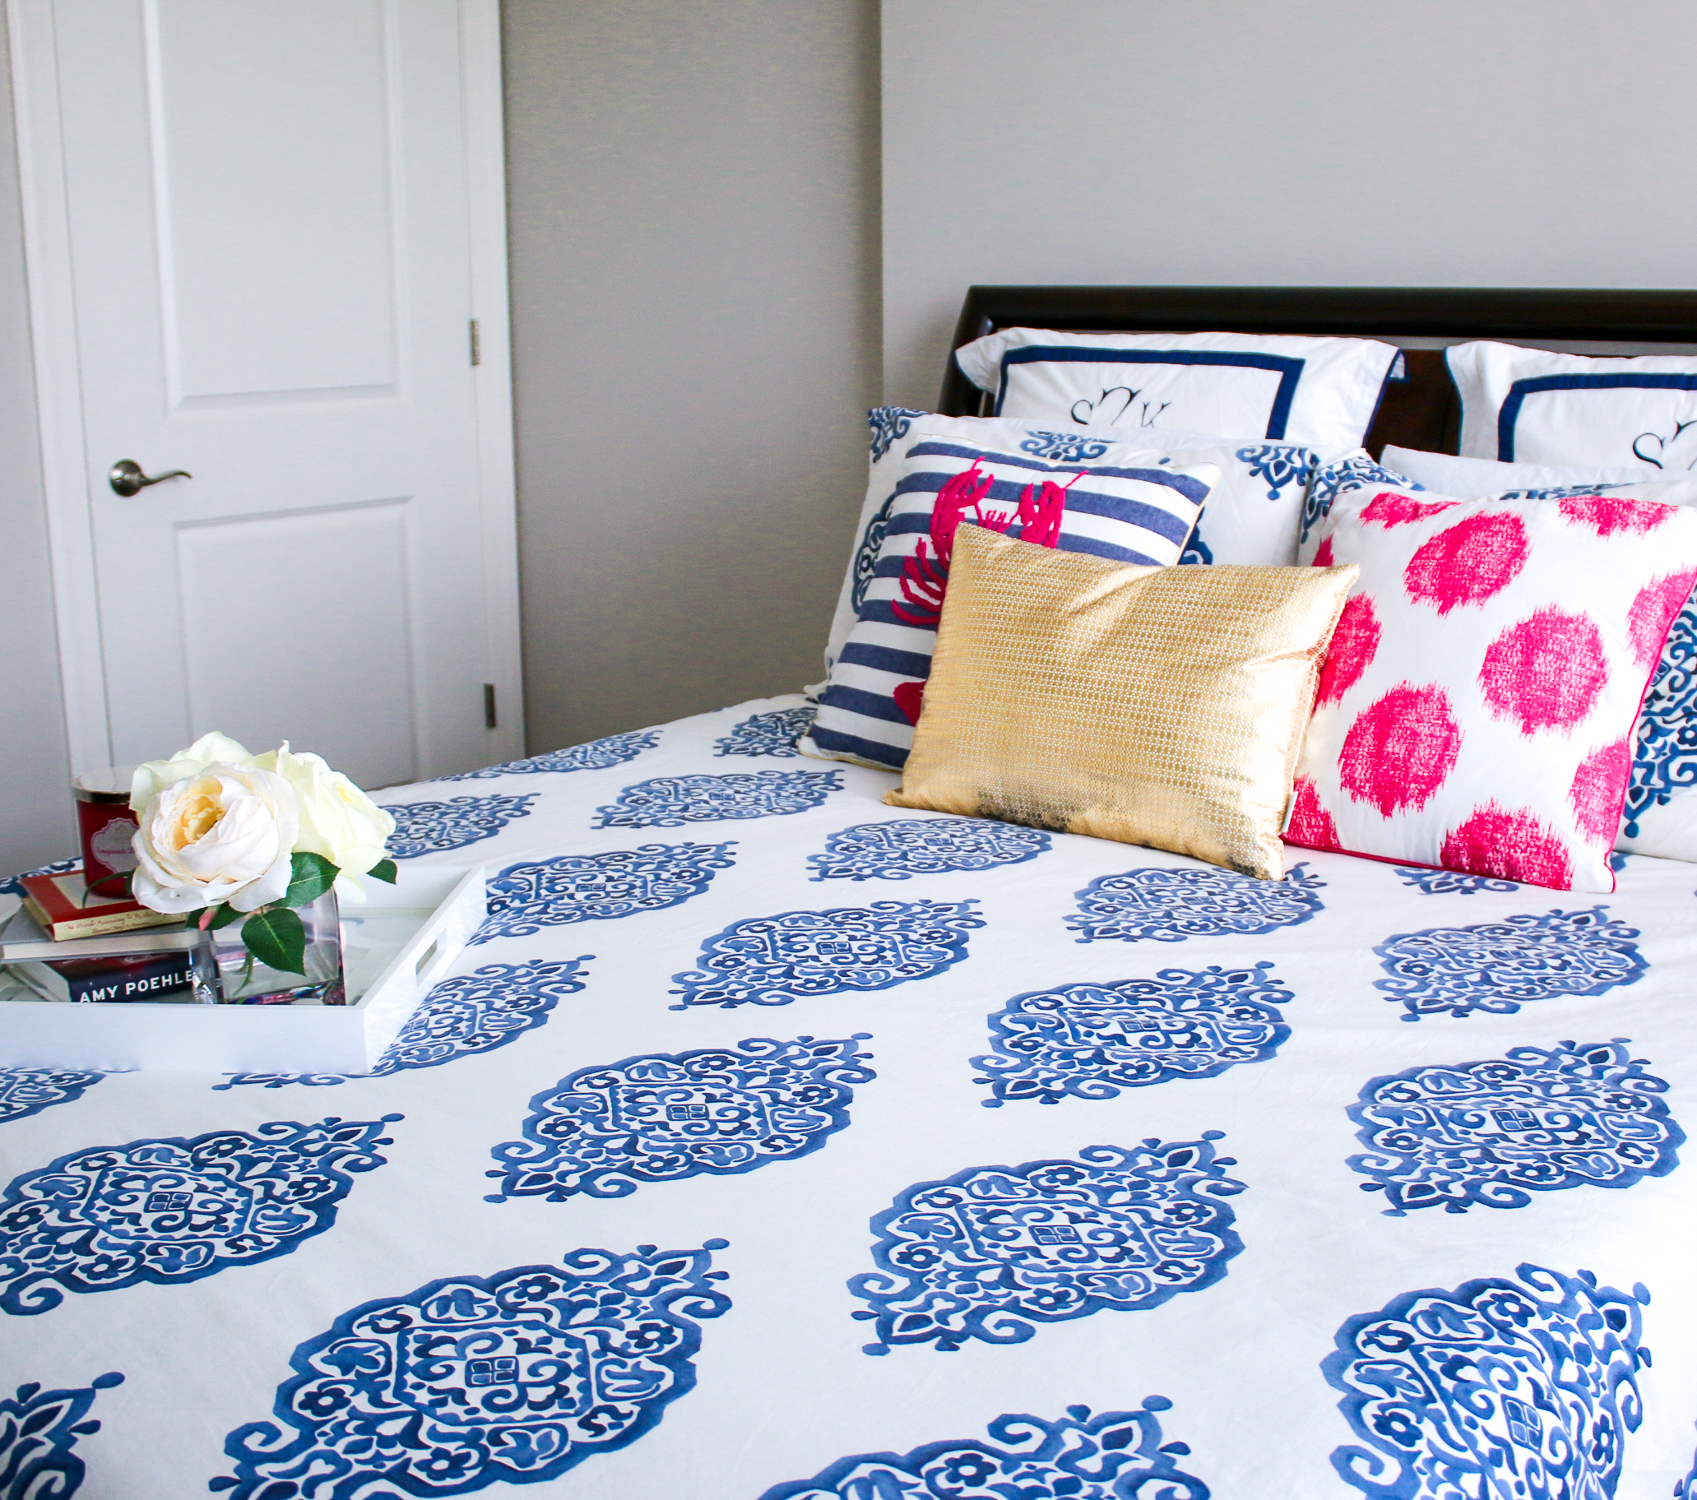 Columbia Apartment Tour: How to Decorate and Furnish a Temporary Apartment on a Budget